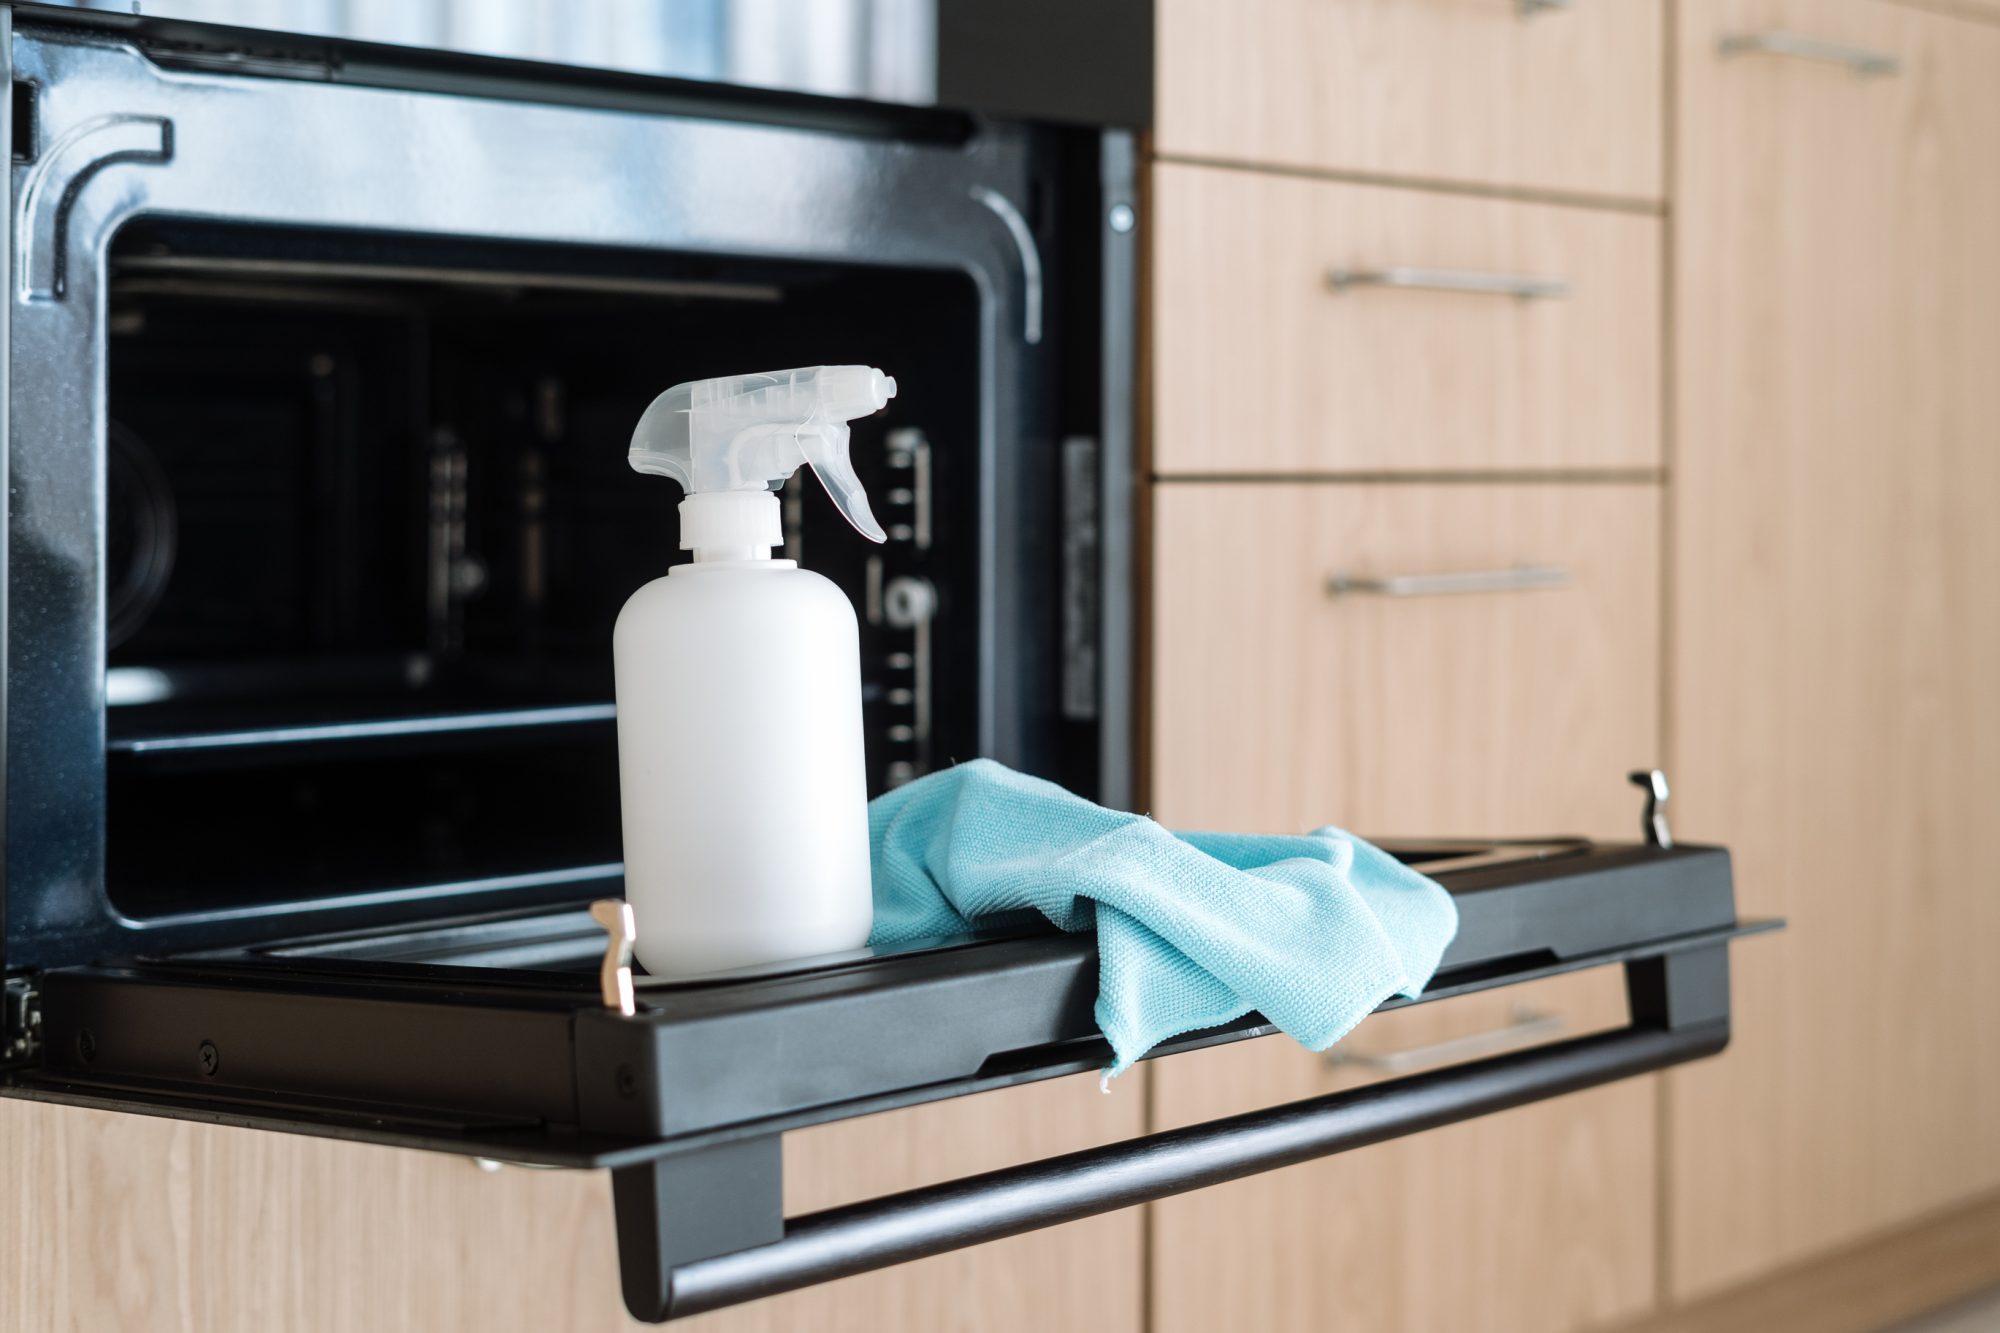 White spray bottle with detergent and cloth standing on open oven door. Advertising concept of cleaning household appliance at home kitchen